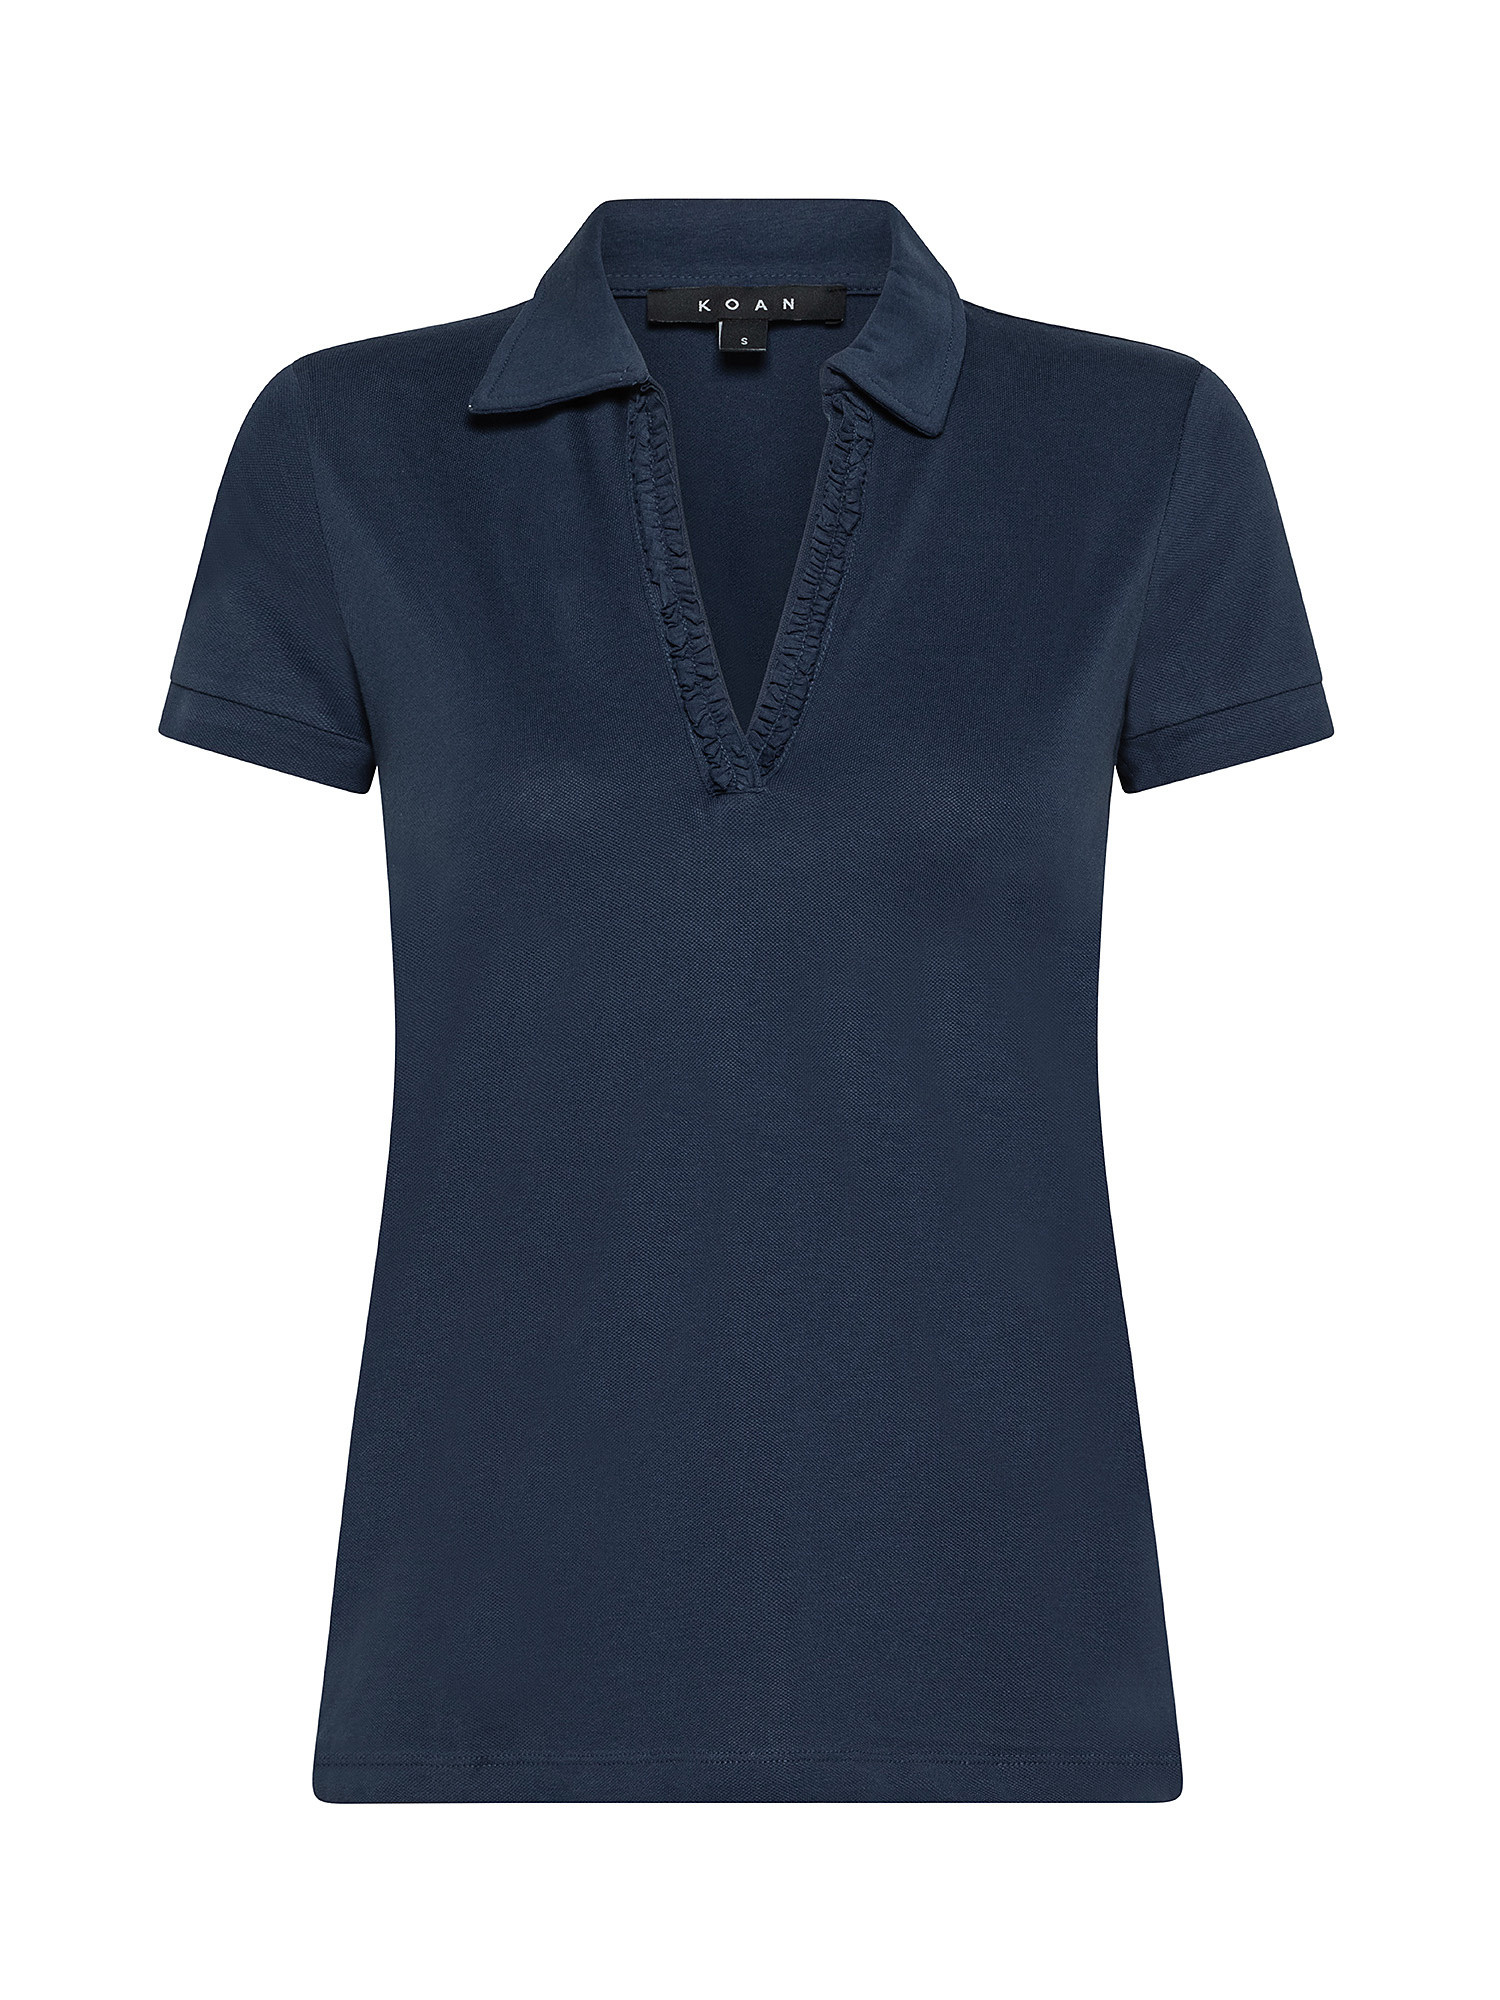 Polo shirt with rouches, Dark Blue, large image number 0